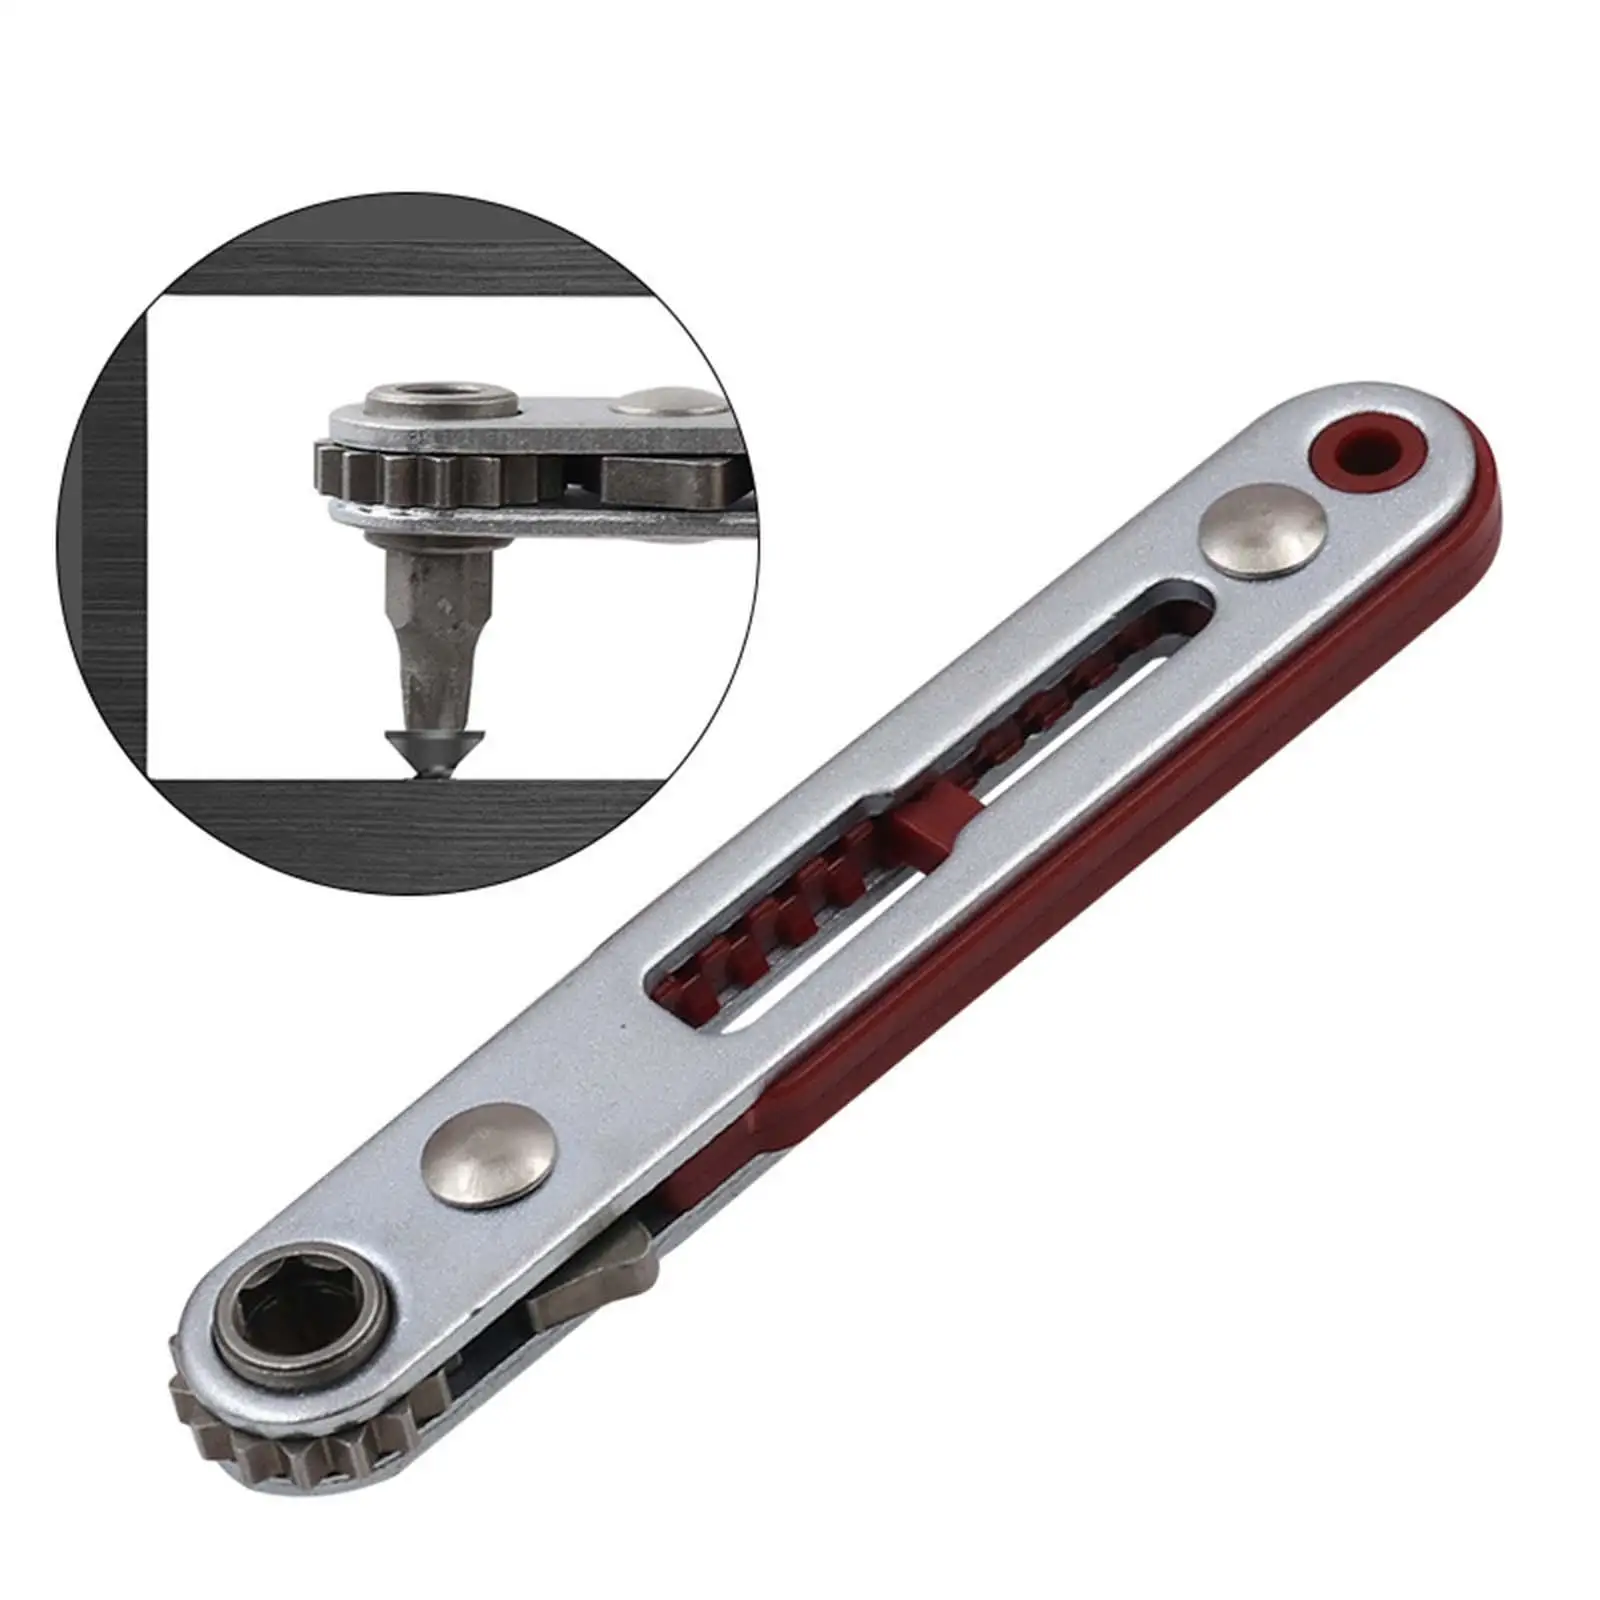 High torque Socket Hex Screwdriver with Two Heads 1/4 Low Profile Head Ratchet Wrench Mini Ratchet Wrench